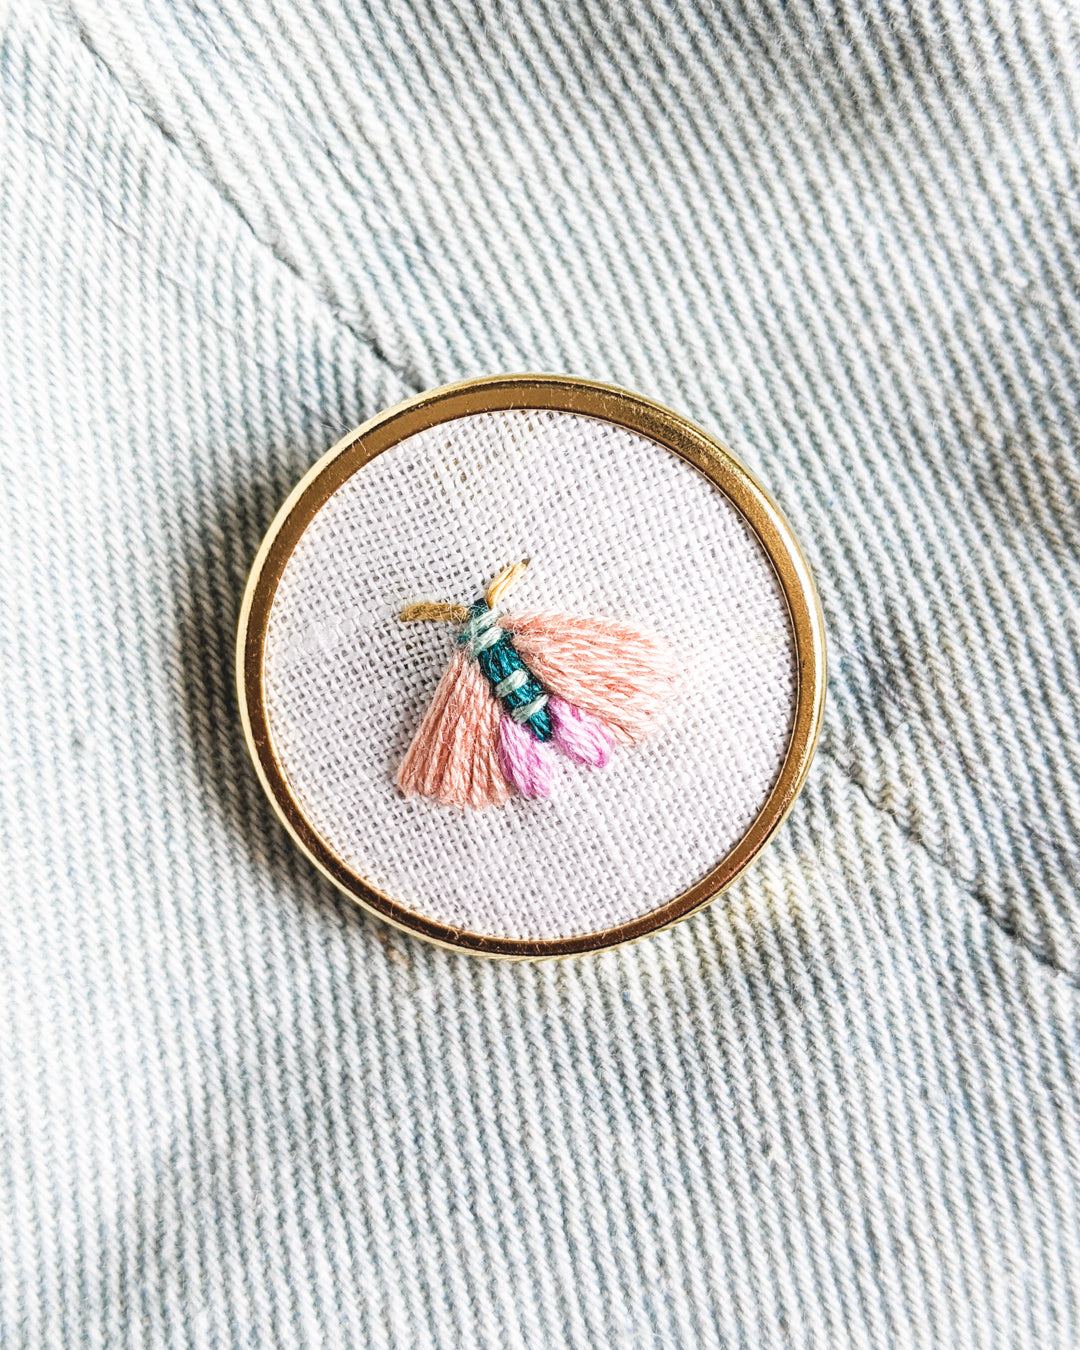 Embroidered Butterfly Moth Pin - no. 7